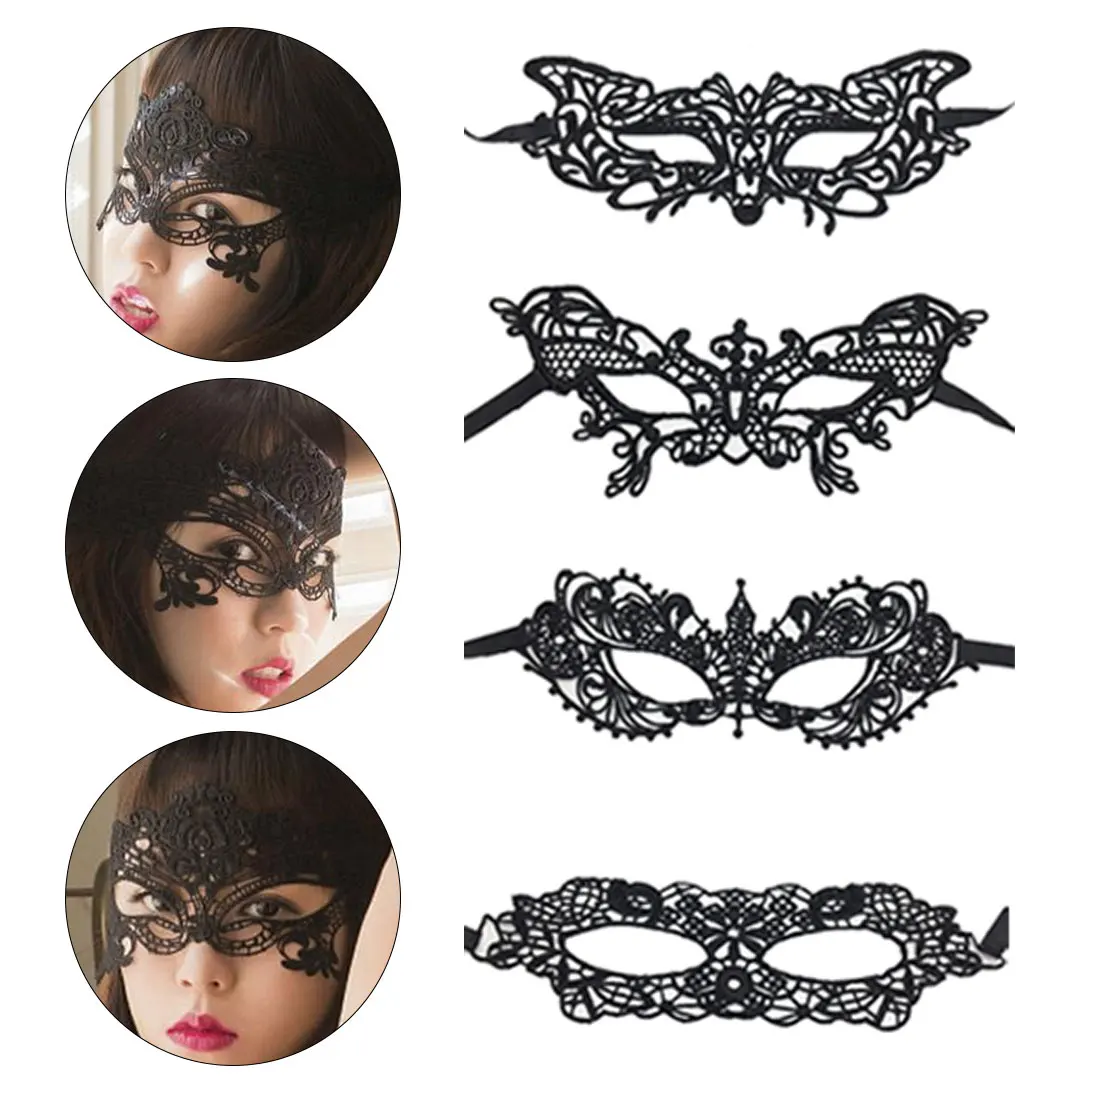 

Black Lace Floral Eye Mask Masquerade Fancy Parties mask Sexy Lady Beautiful Eye Mask Halloween Costume